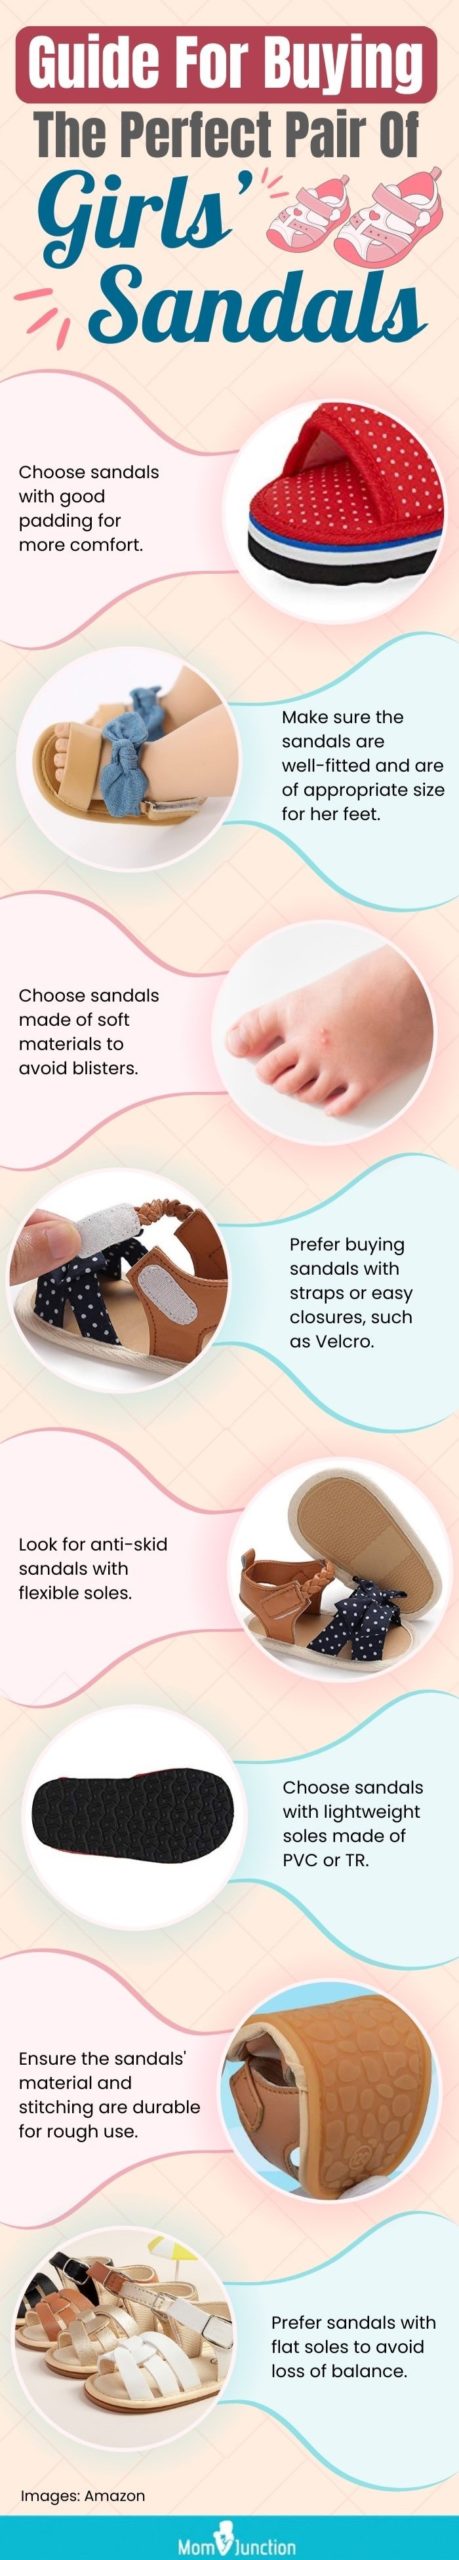 Guide For Buying The Perfect Pair Of Girls’ Sandals (infographic)